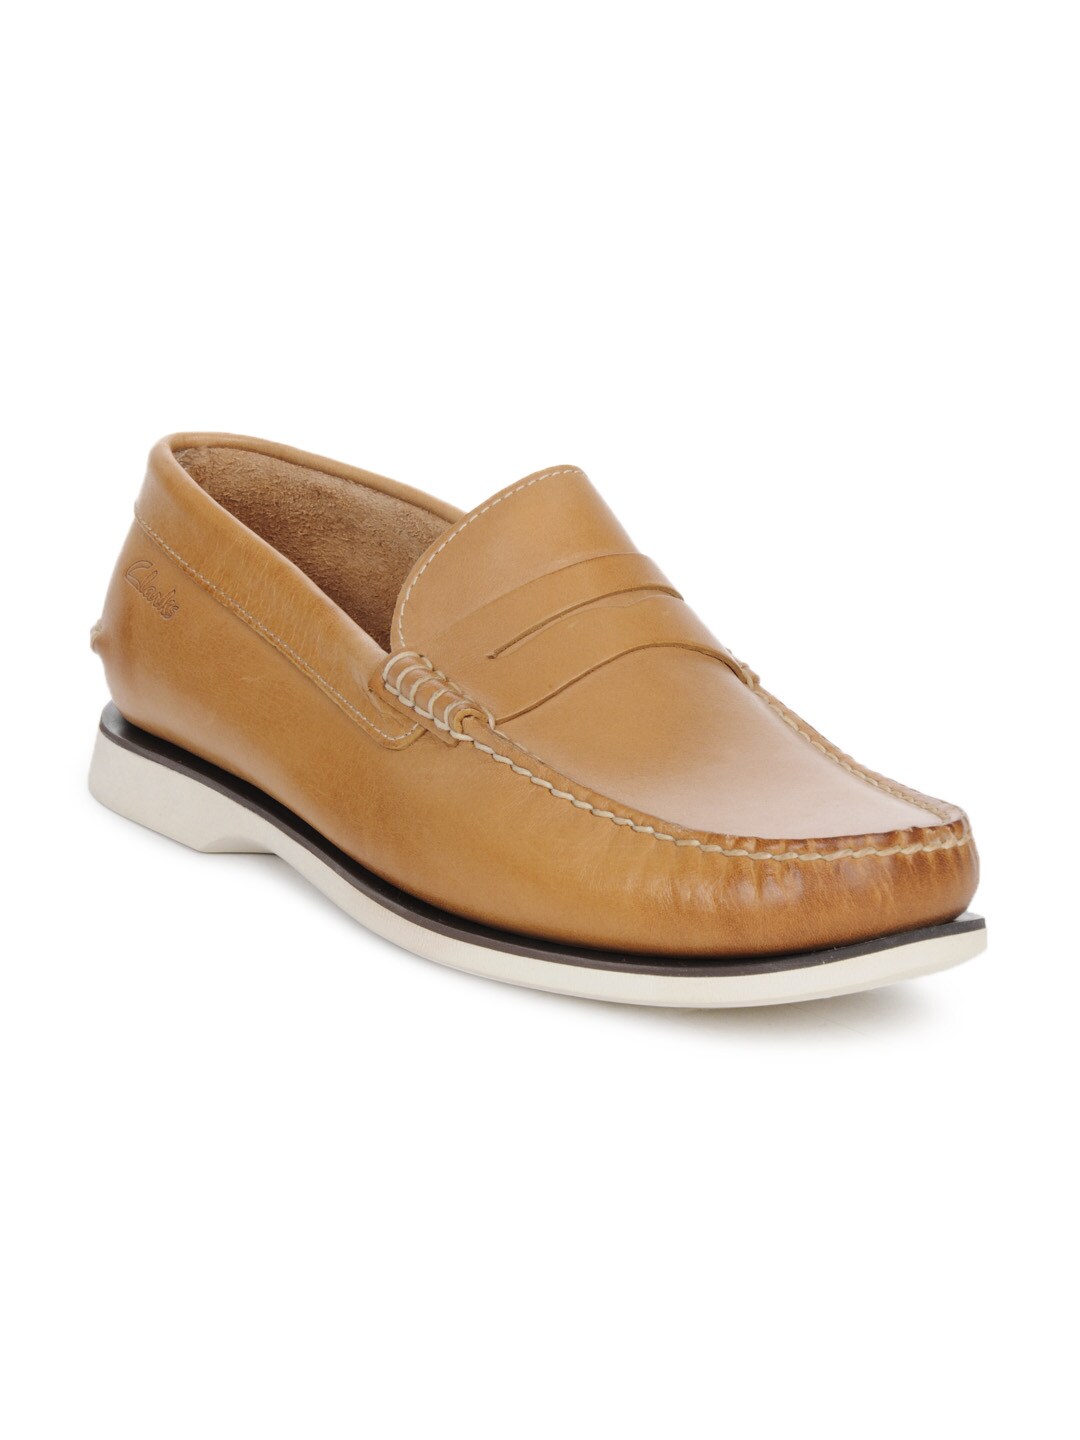 Clarks Men Tan Brown Leather Casual Shoes